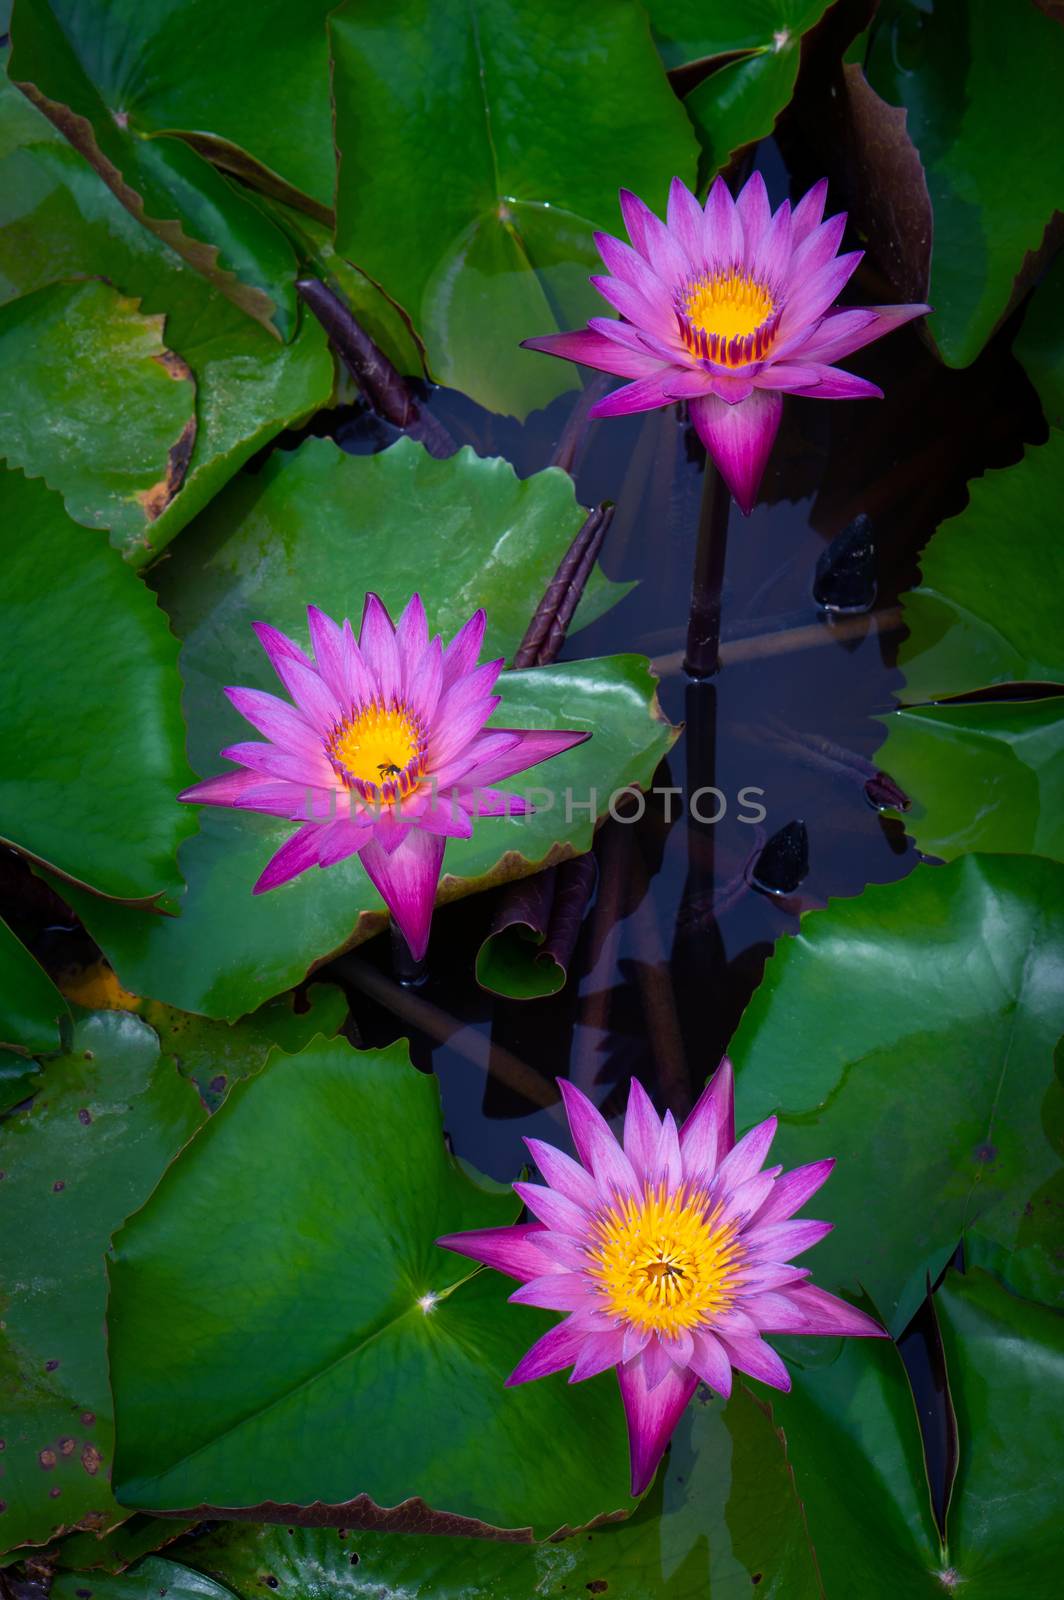 Pink lotus flowers in the lotus pond by pkproject